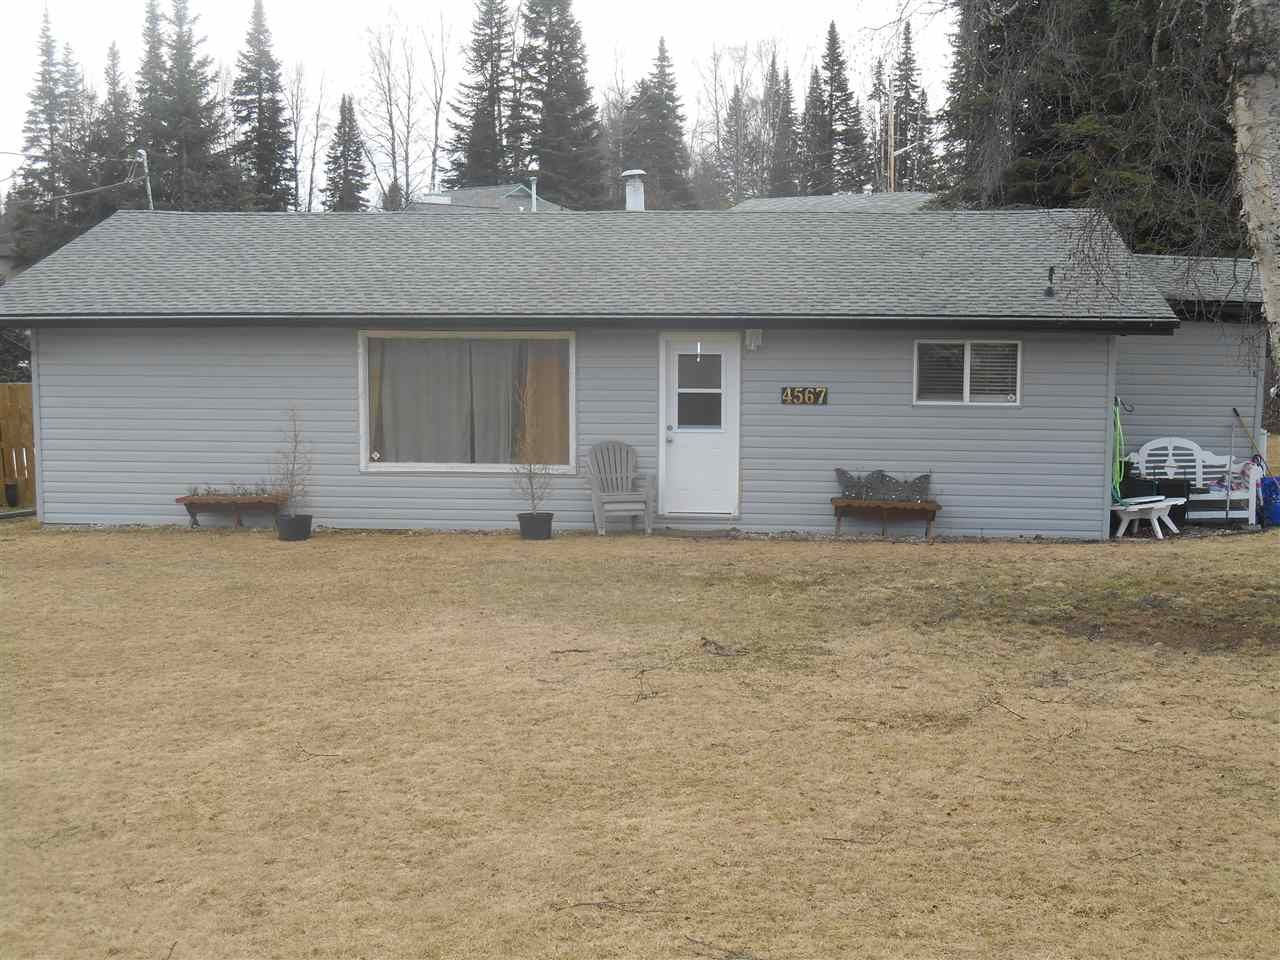 Main Photo: 4567 HEATHER Road in Prince George: North Kelly House for sale (PG City North (Zone 73))  : MLS®# R2133681